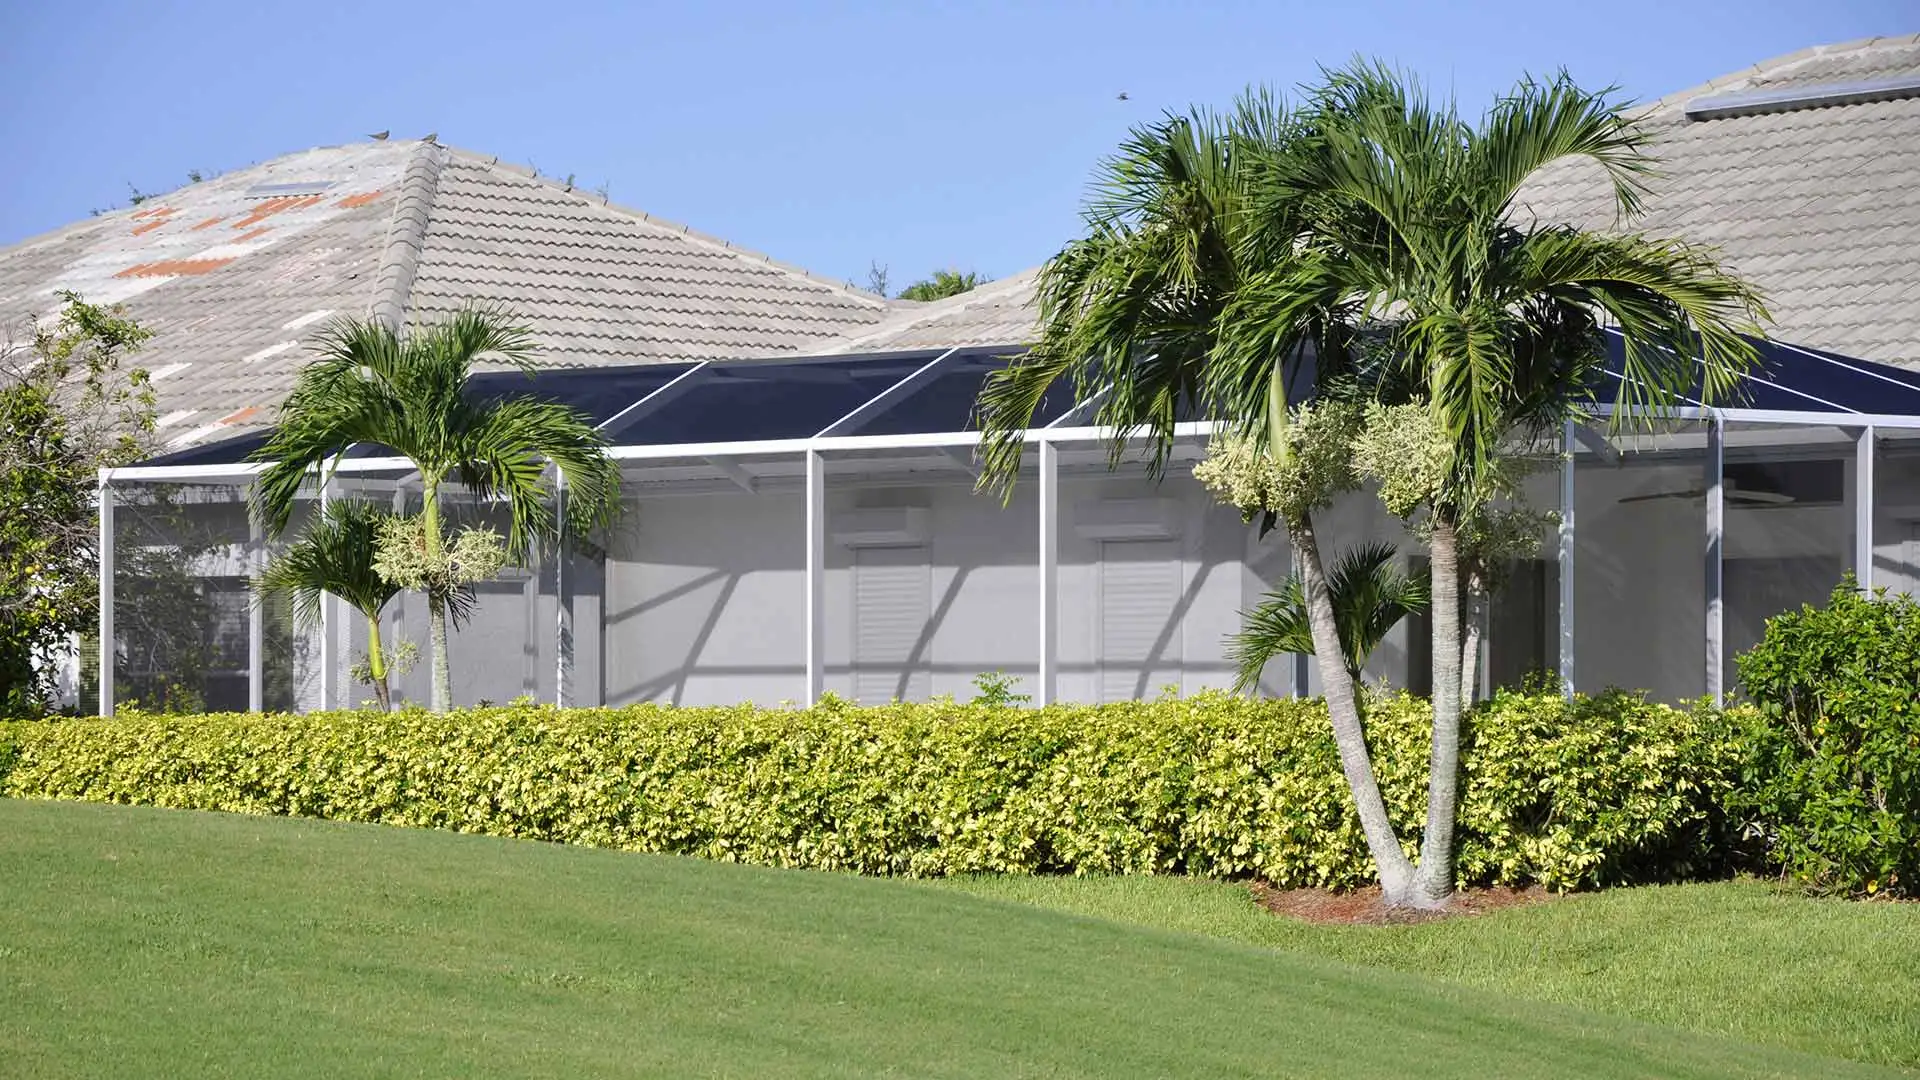 Palm trees showing in landscape for home in Cape Coral, FL.